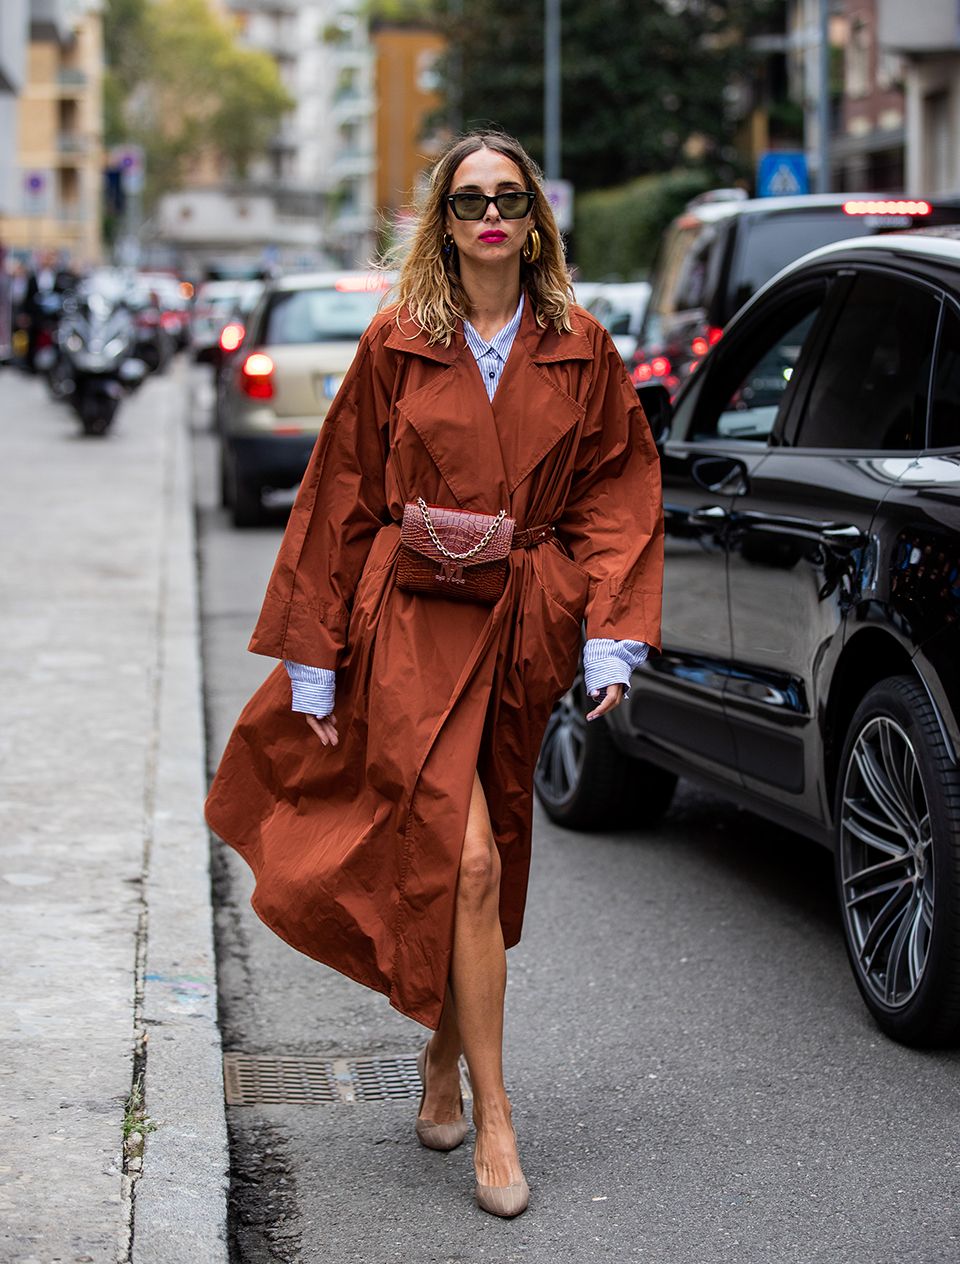 How to style a trench coat: swap a belt for a bum bag